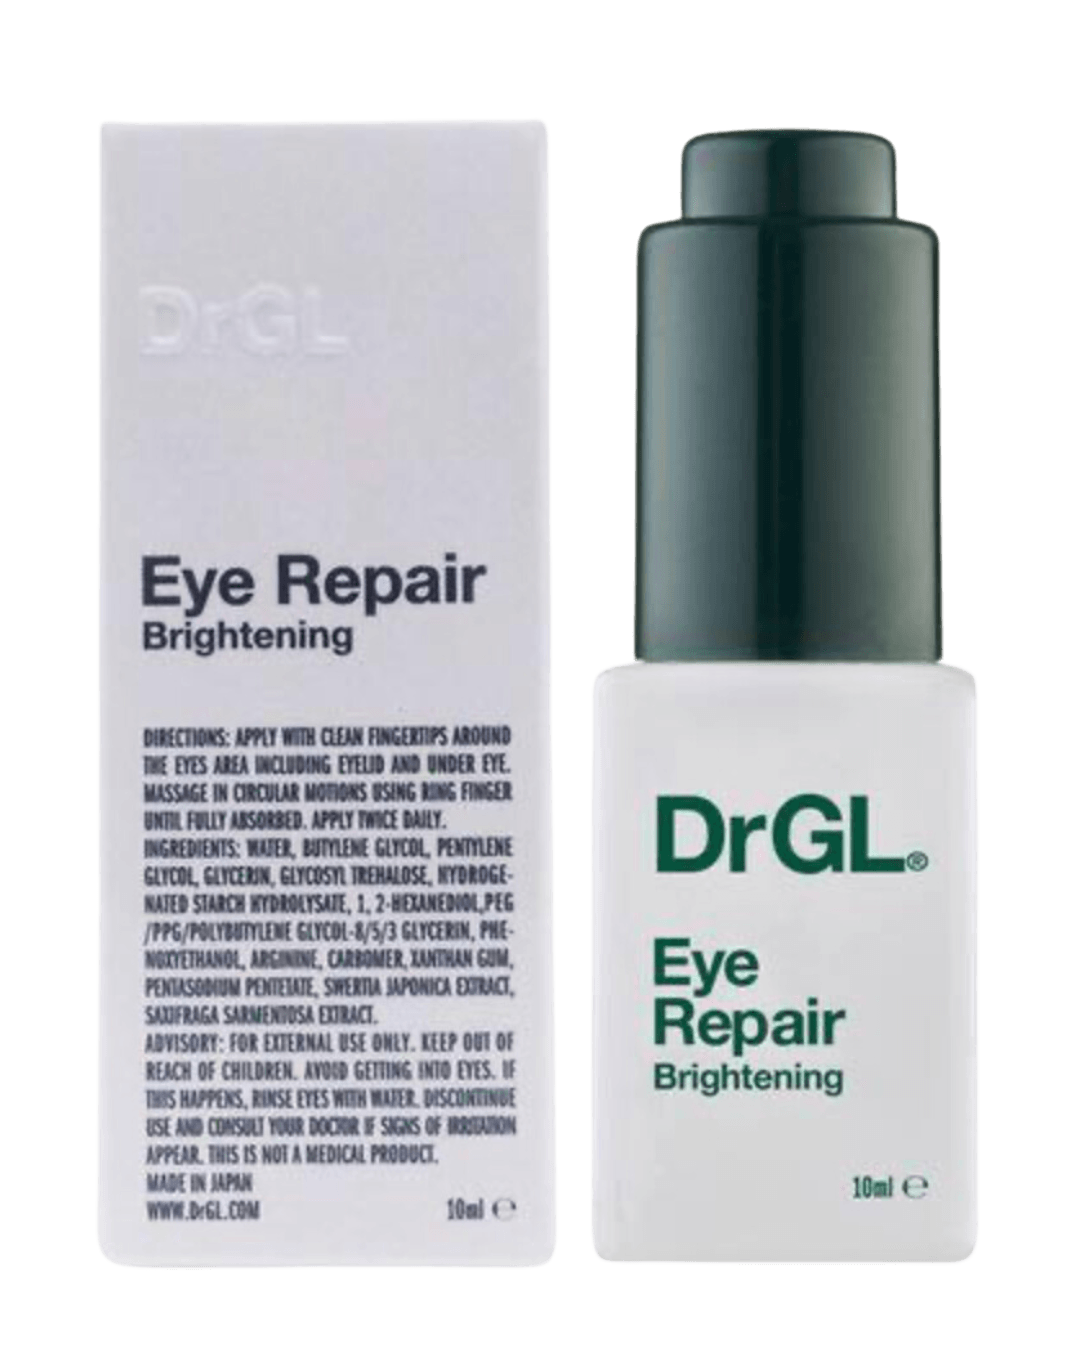 Daily Vanity Beauty Awards 2024 Best Skincare DrGL Eye Repair Brightening Voted By Beauty Experts